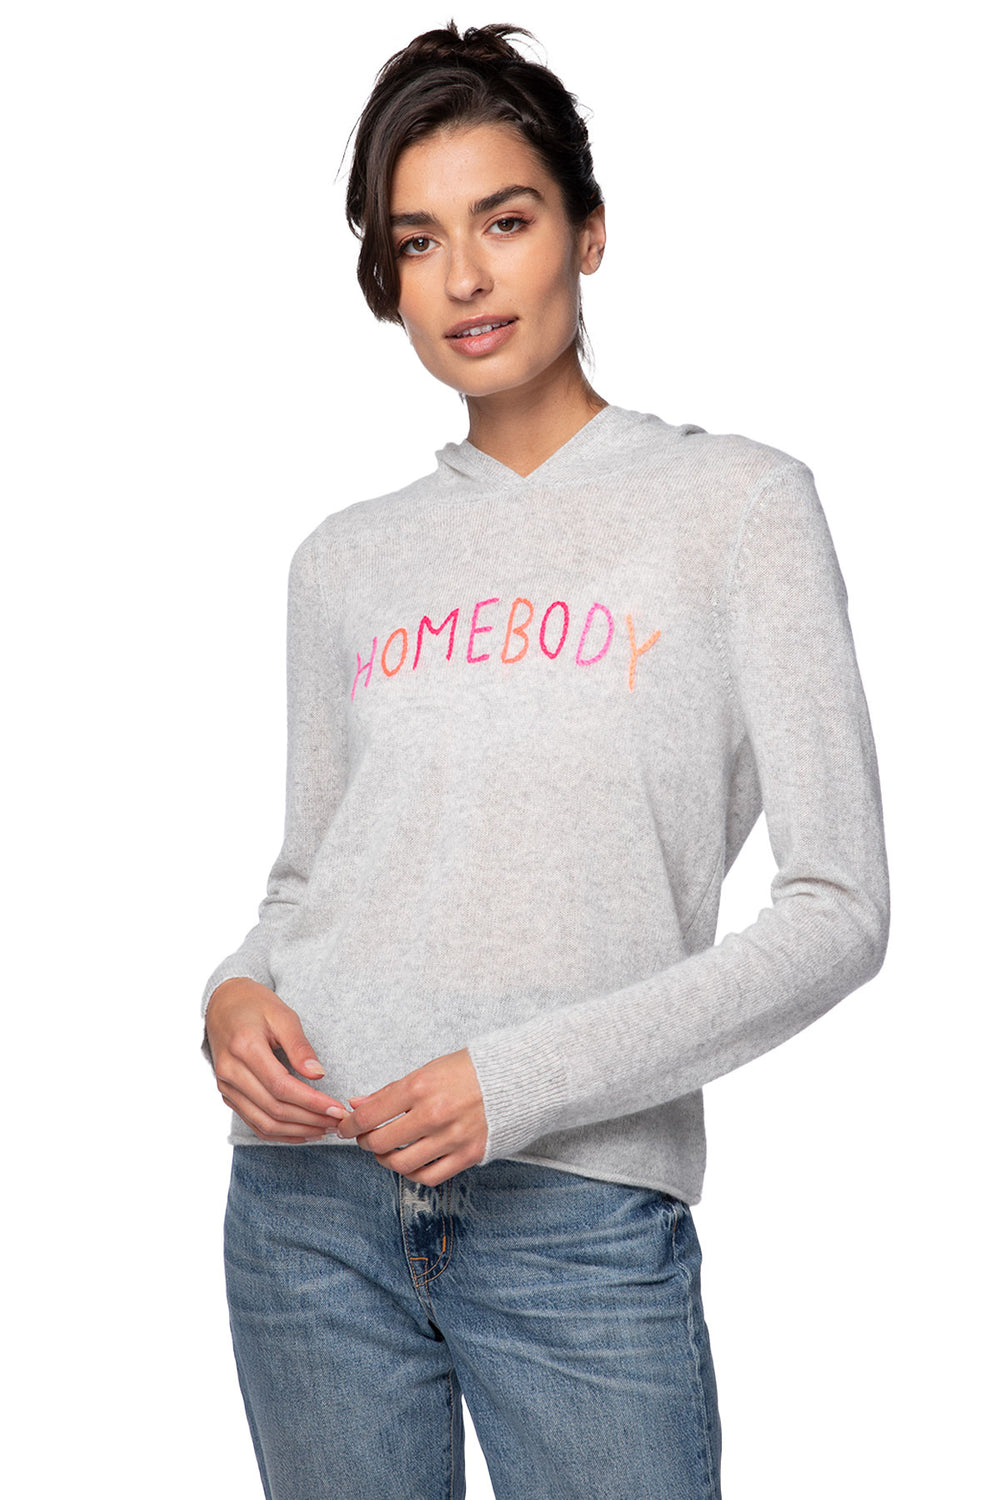 Bon Voyage | Embroidery Cashmere Hoodie |  Homebody - goldensunbrand